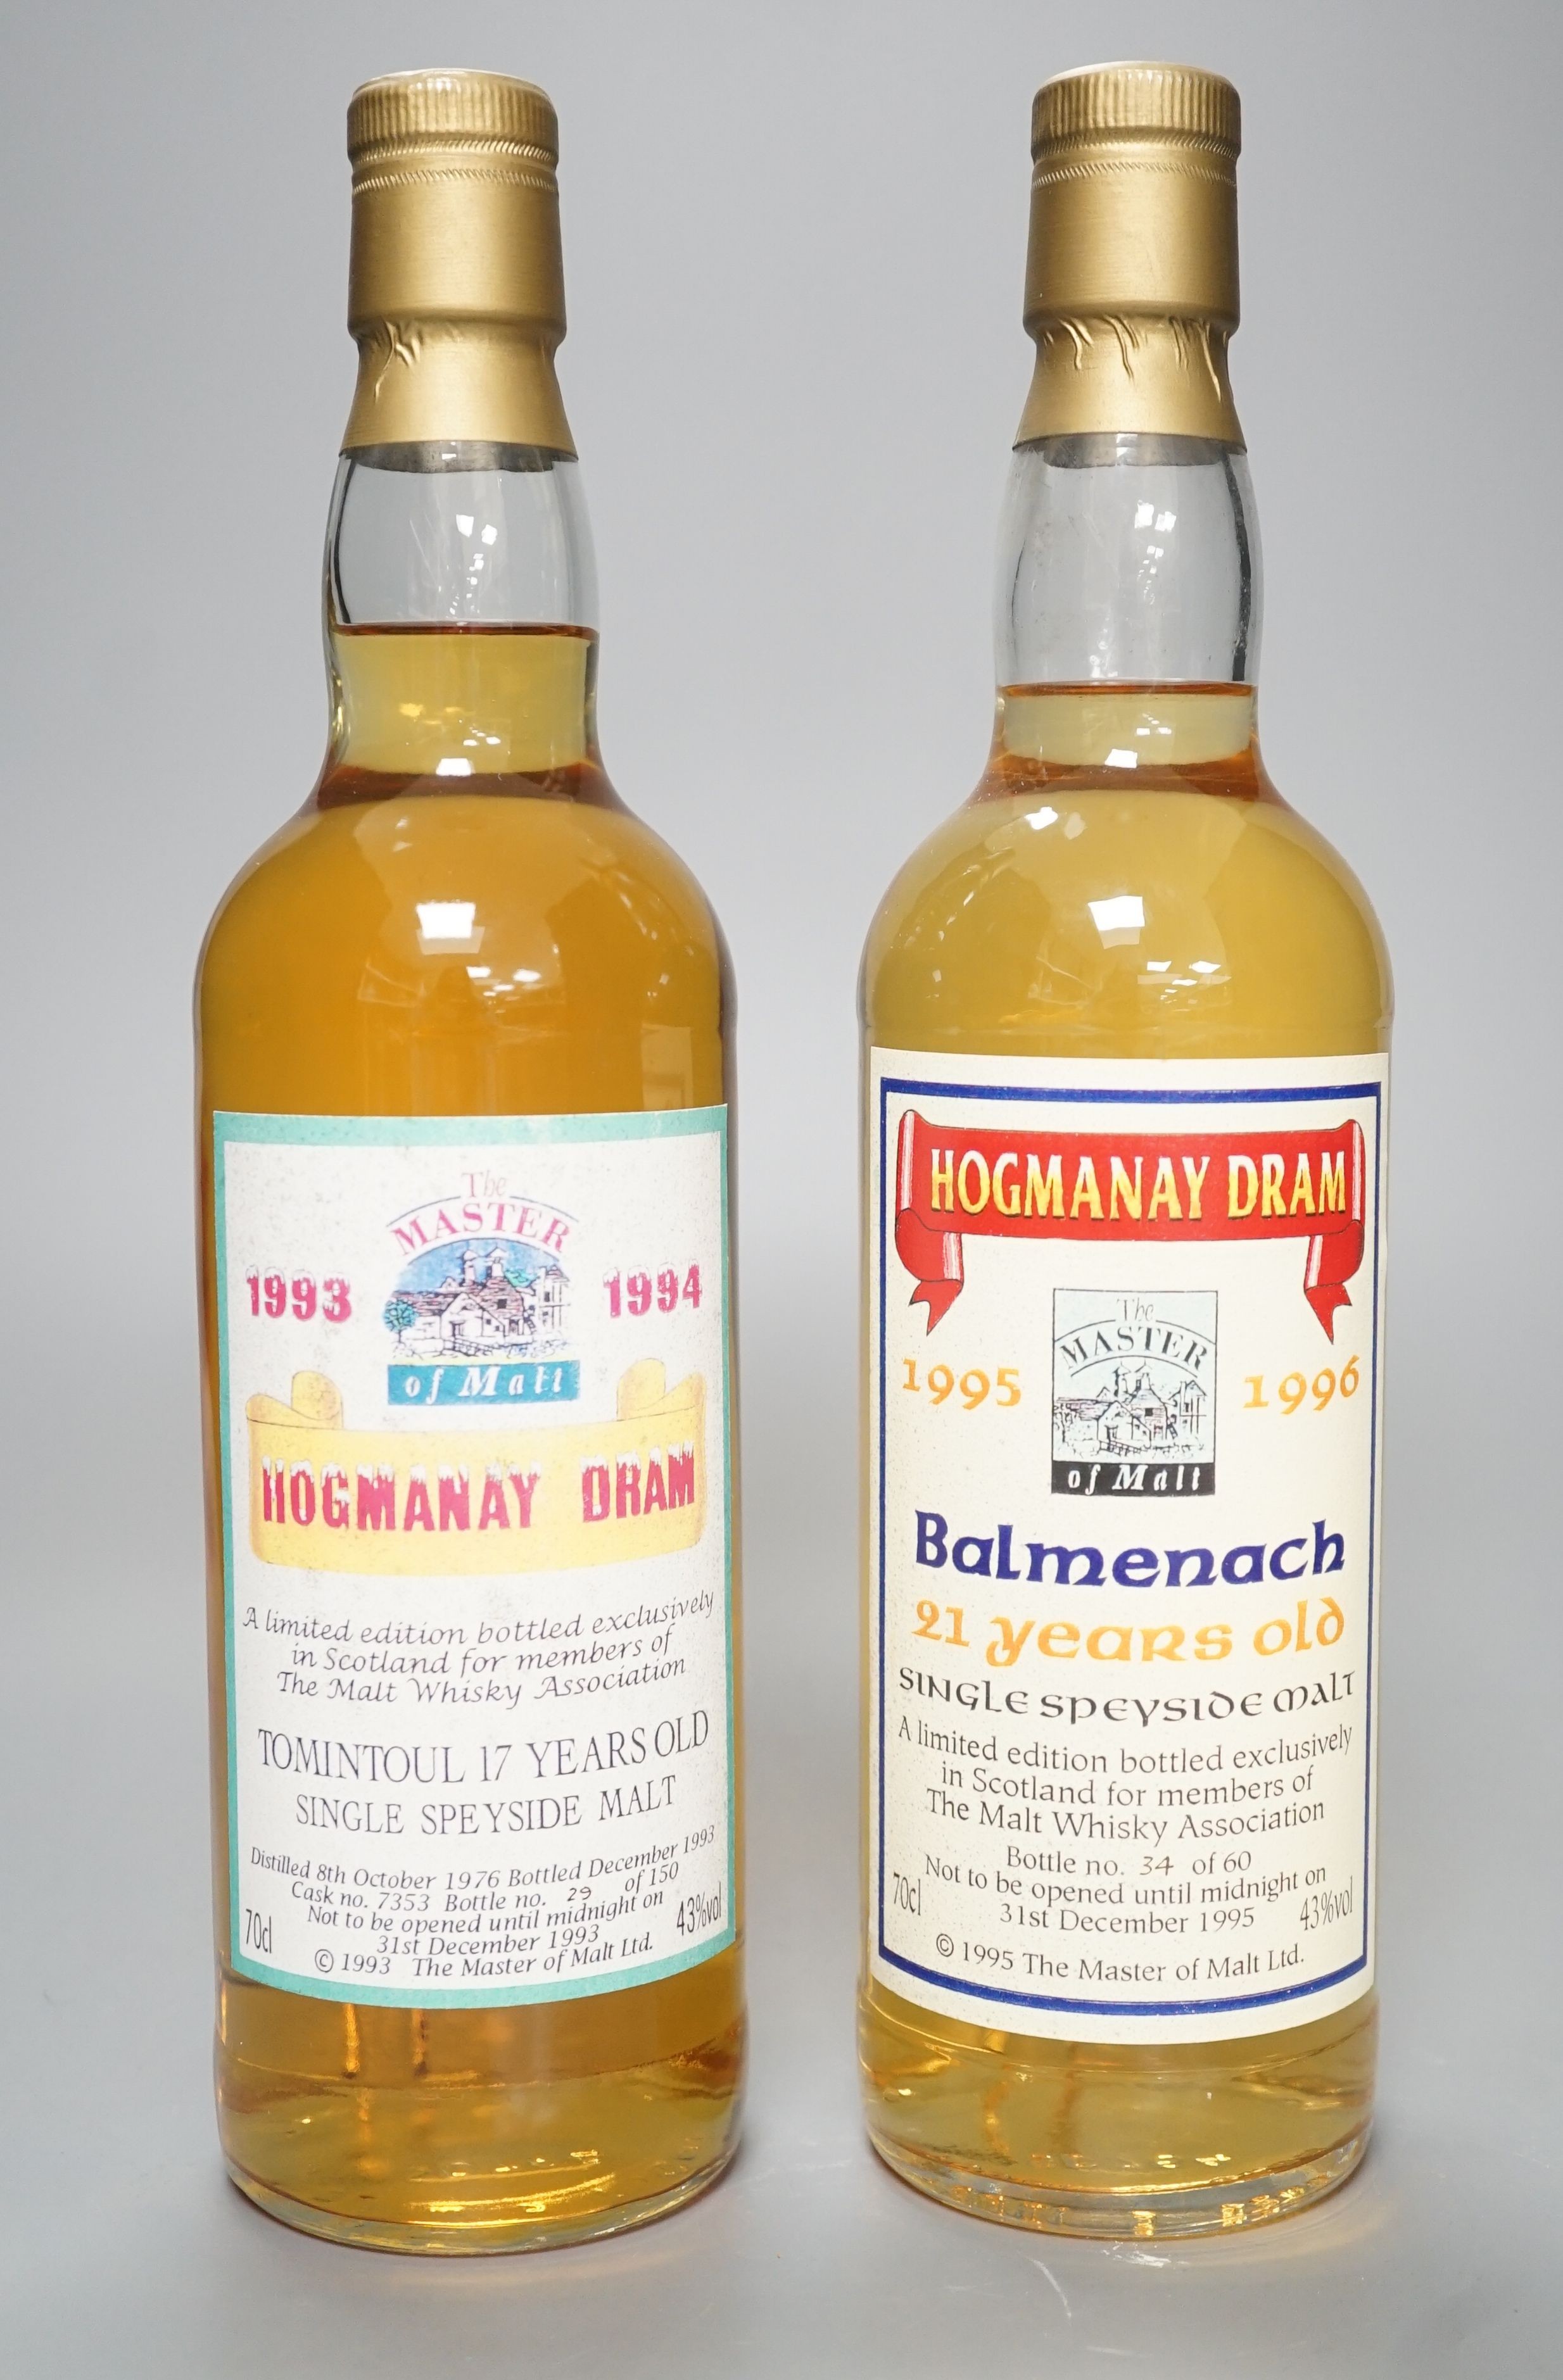 Two exclusive Master of Malt series whiskies: Hogmanay dram 1993/1994 Tomintoul 17 year old, distilled 8/10/76 bottled 12/1993 case no. 7353 bottle 29/150 and Balmenach 21 year old, bottle no. 34/60 'not to be opened unt